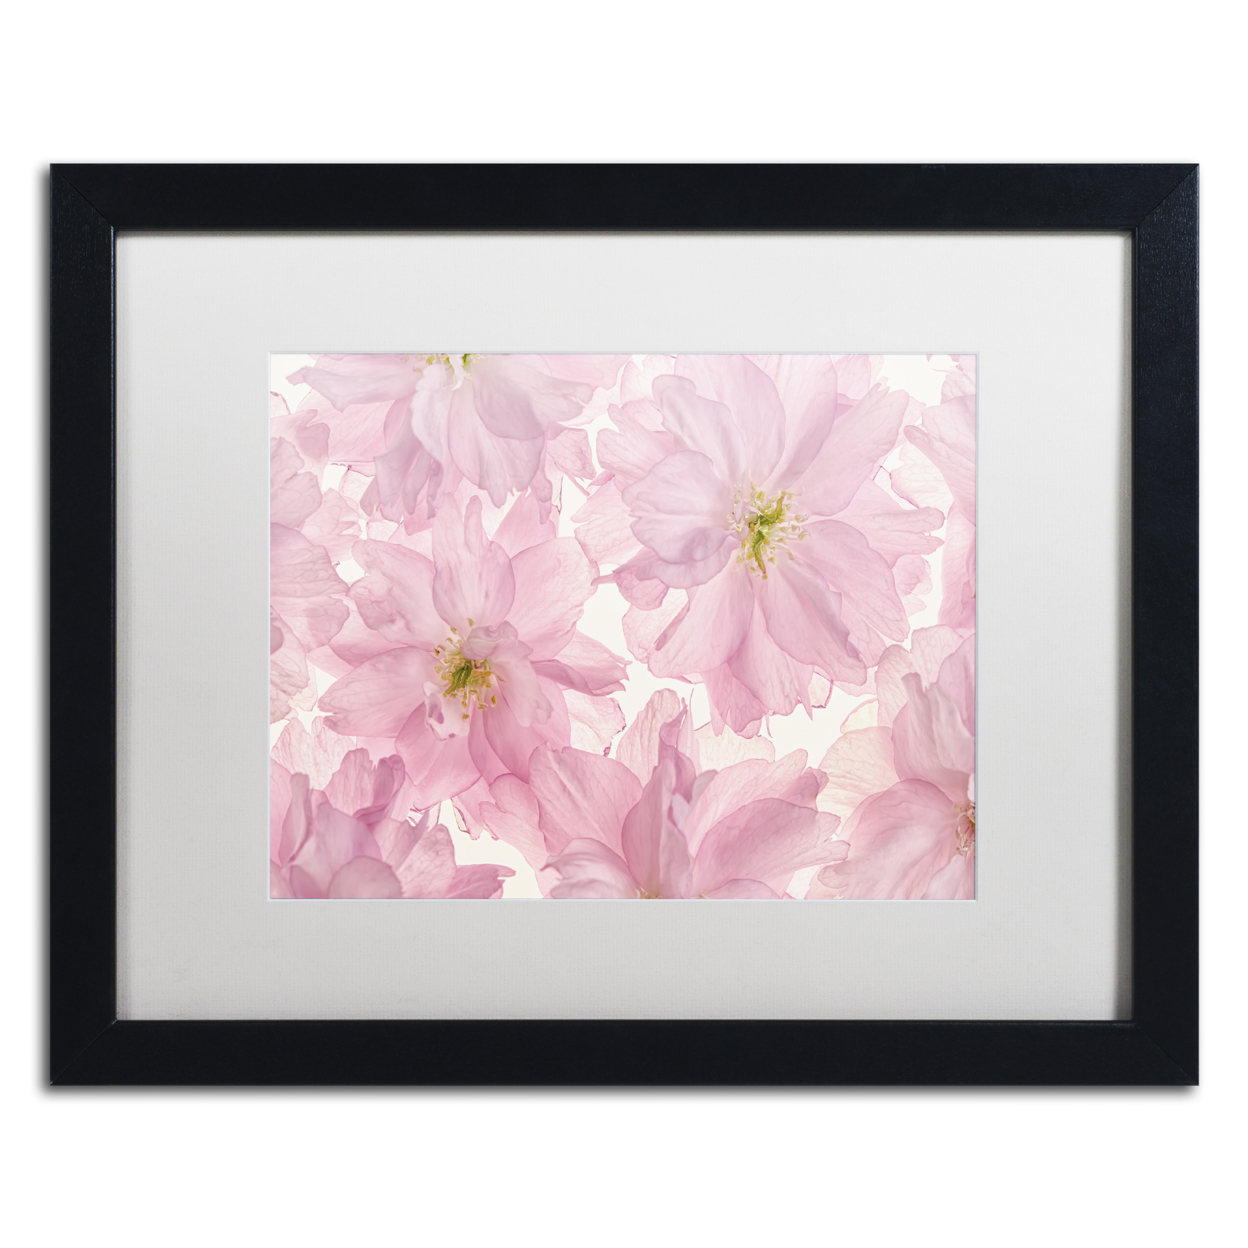 Cora Niele 'Pink Cherry Blossom' Black Wooden Framed Art 18 X 22 Inches